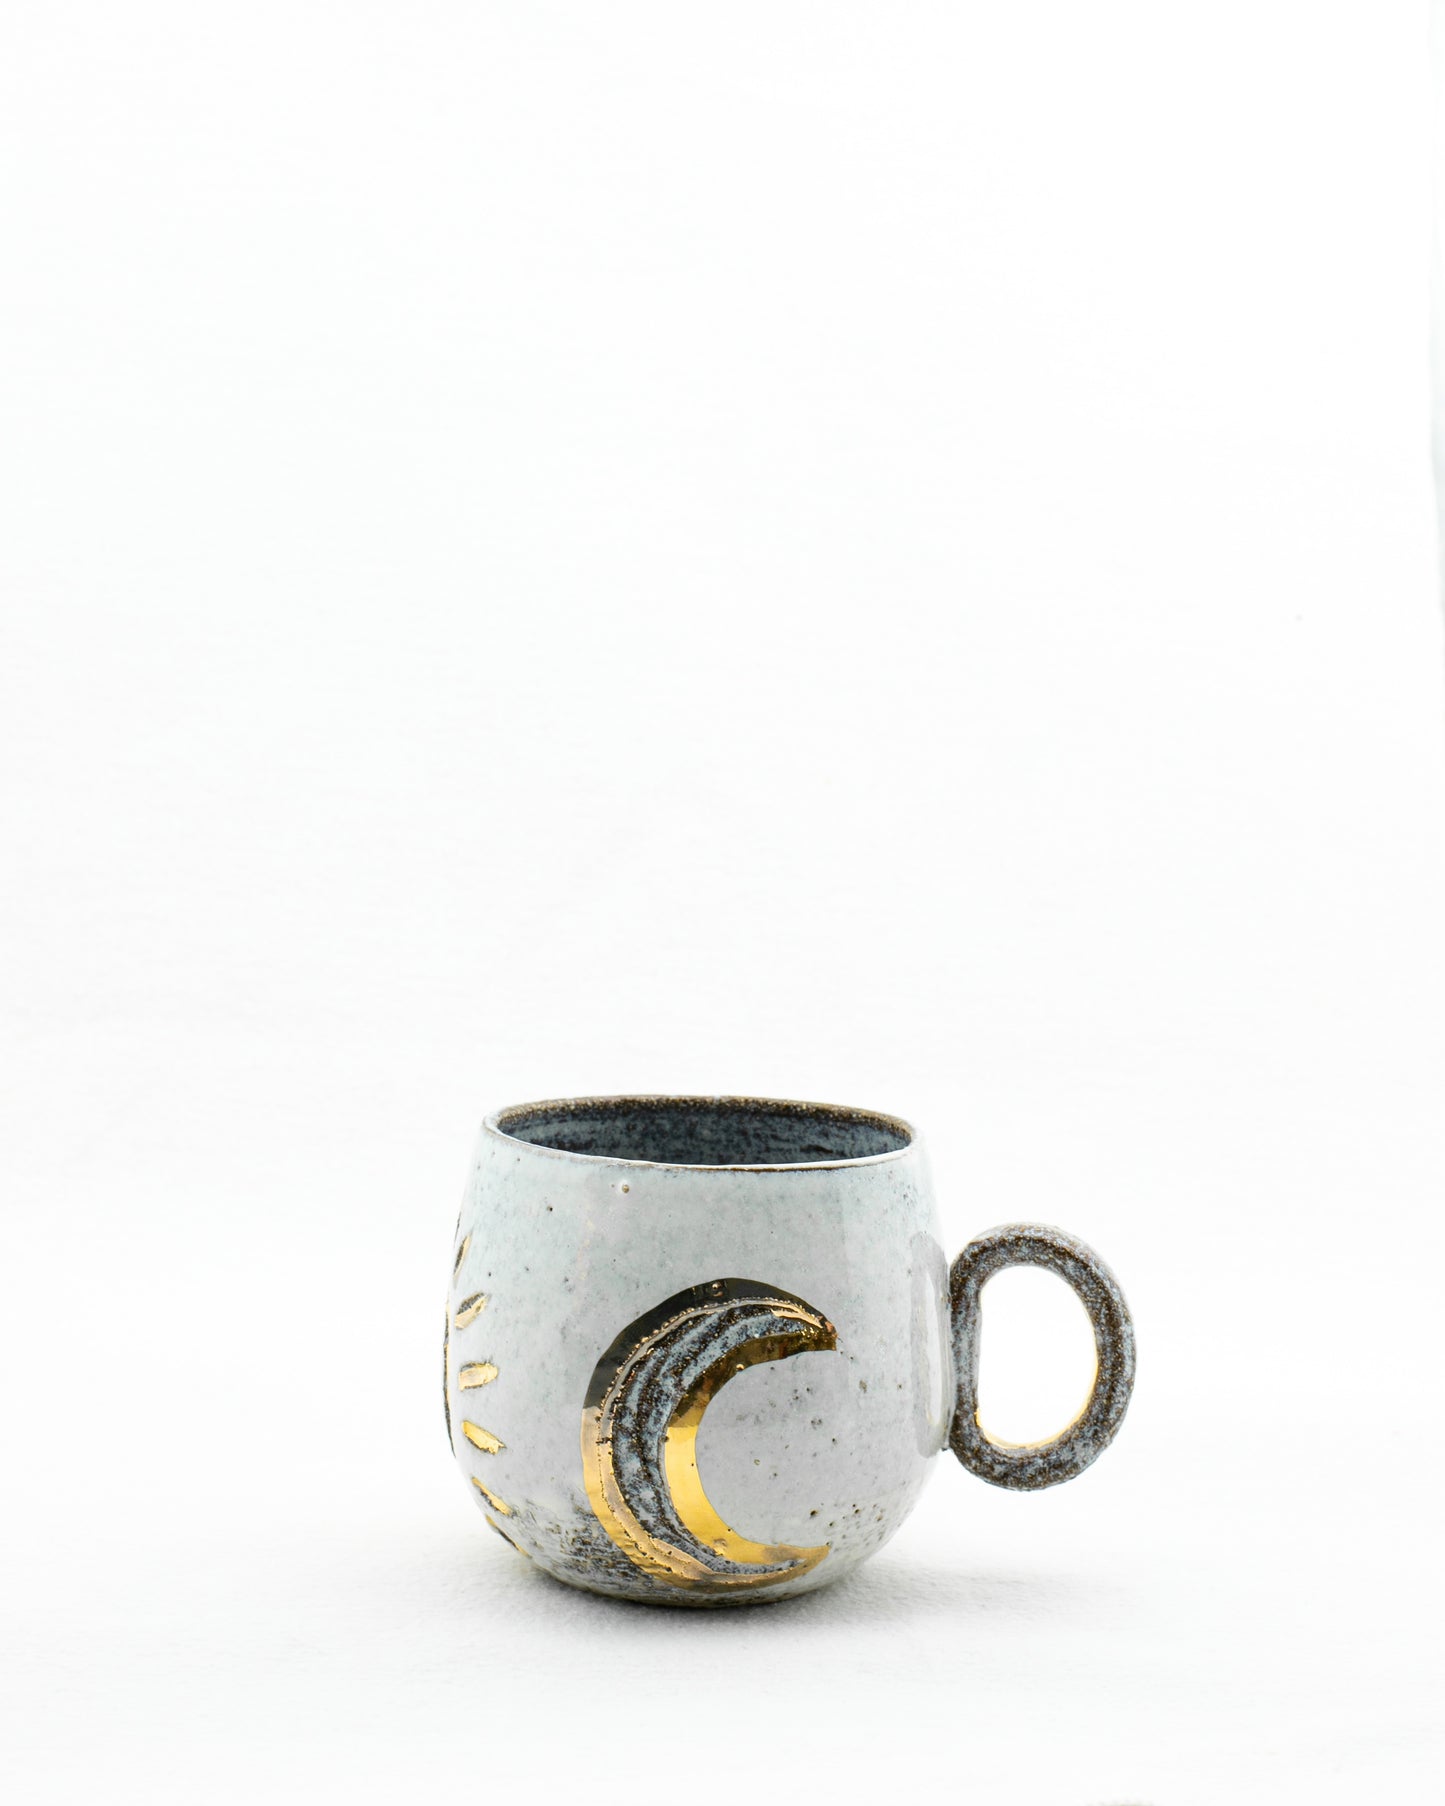 Sacred Full Moon - Moon Phases Ceramic Cup